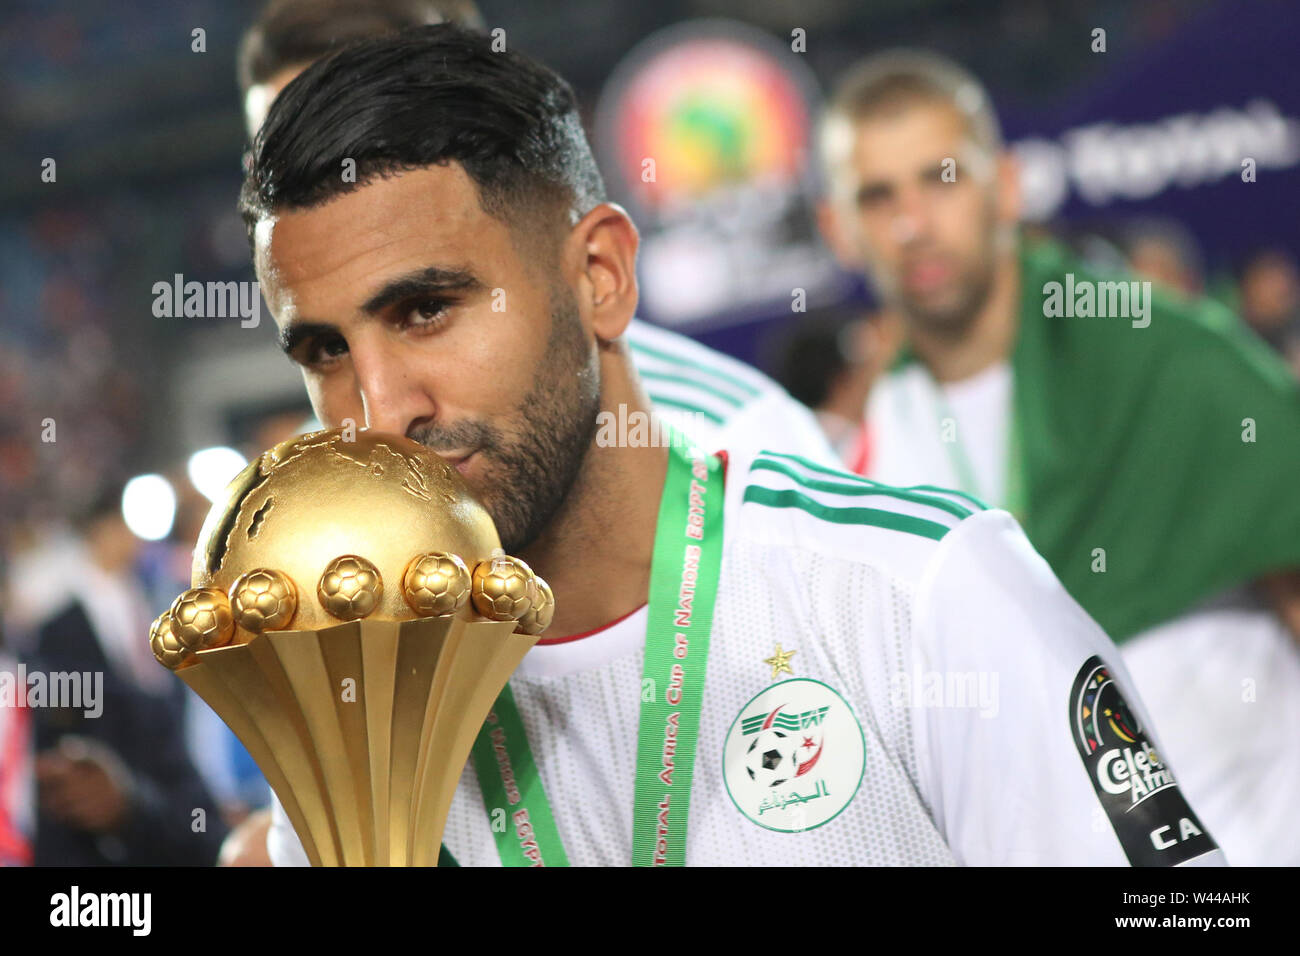 Cairo, Egypt. 19th July, 2019. Algeria's Riyad Mahrez kisses the trophy during celebrations after Algeria defeated Senegal in the 2019 Africa Cup of Nations final soccer match at the Cairo International Stadium. Credit: Omar Zoheiry/dpa/Alamy Live News Stock Photo